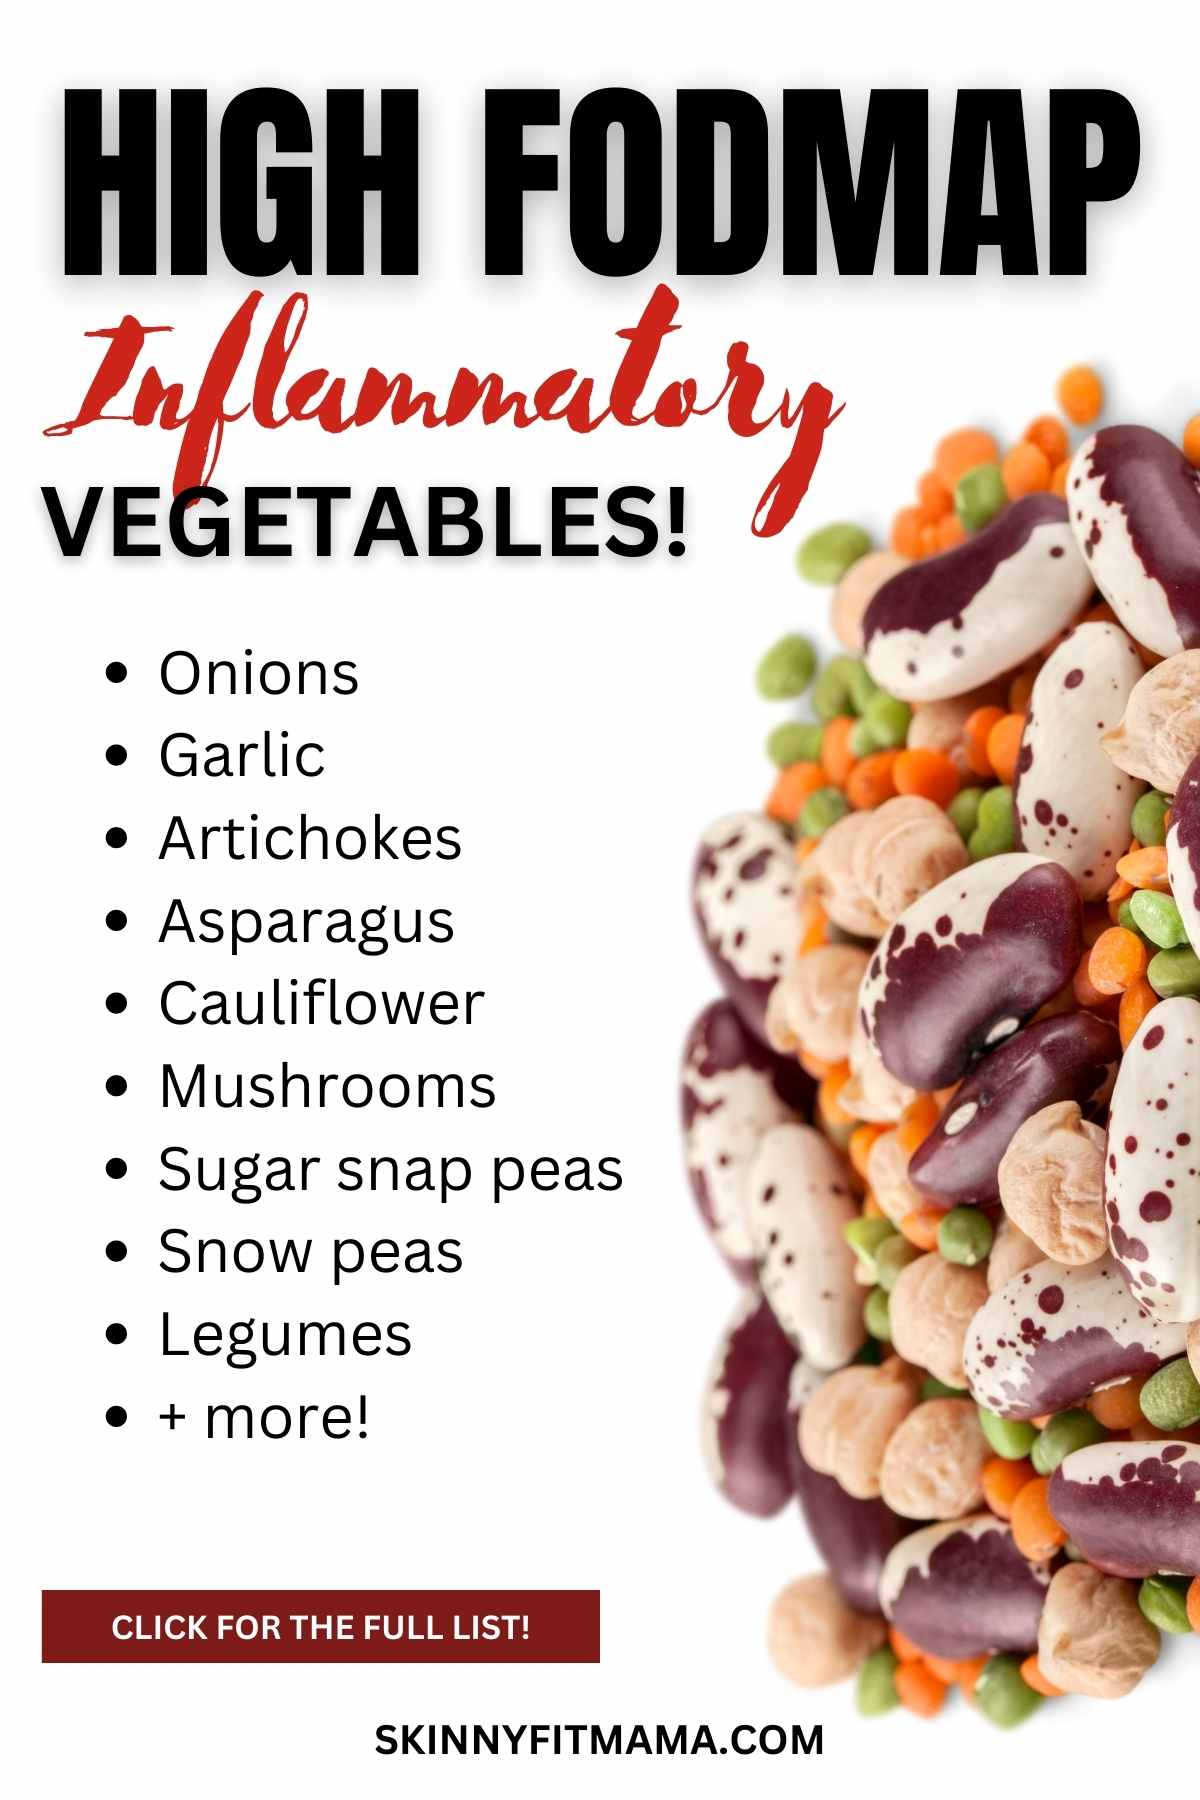 Vegetables That Cause Inflammation - High FODMAP